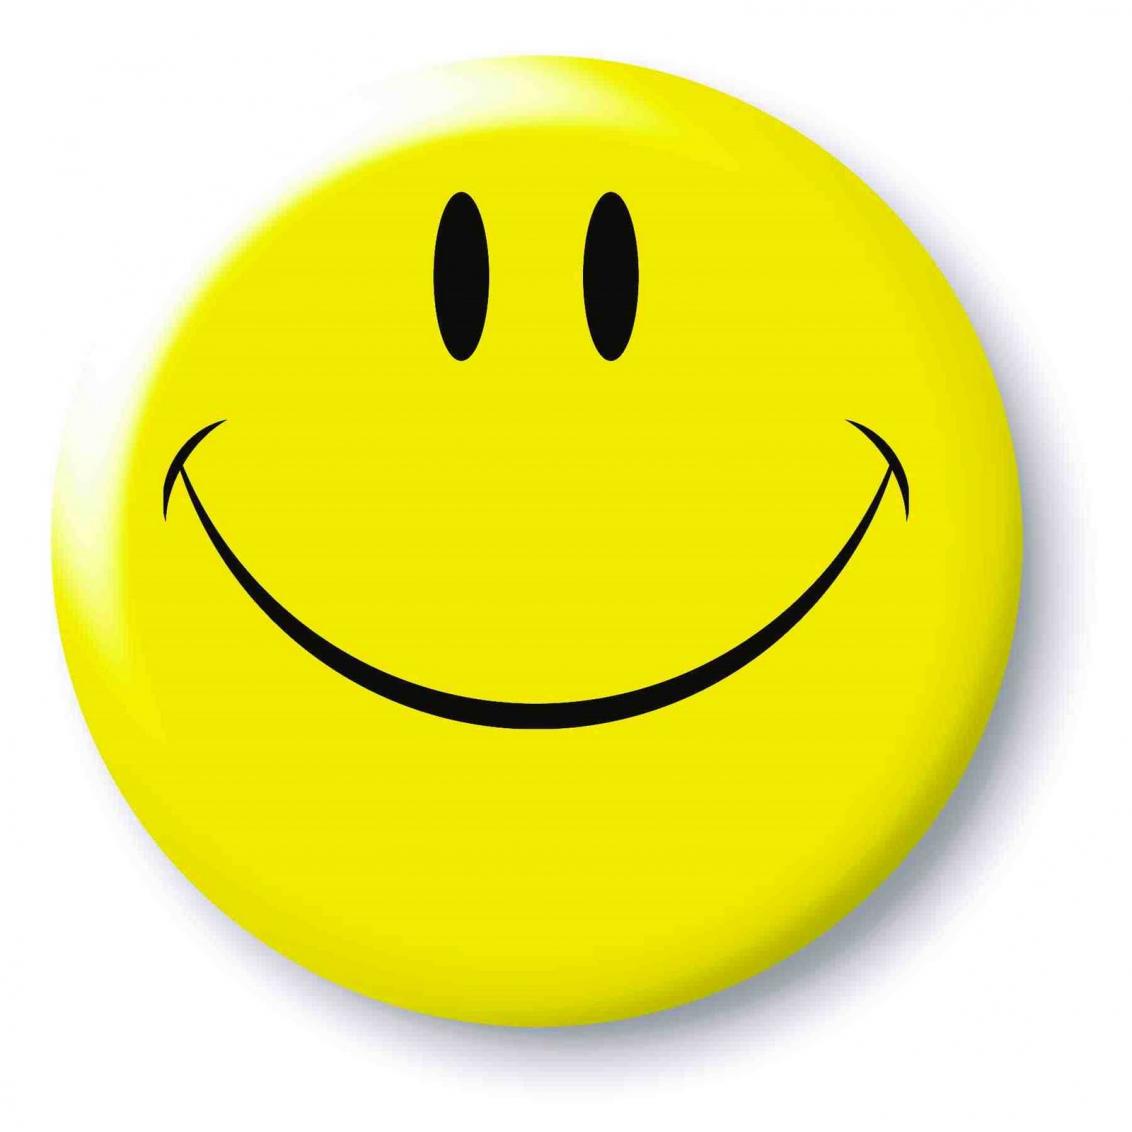 Animated Laughing Smiley | Smile Day Site - ClipArt Best - ClipArt Best